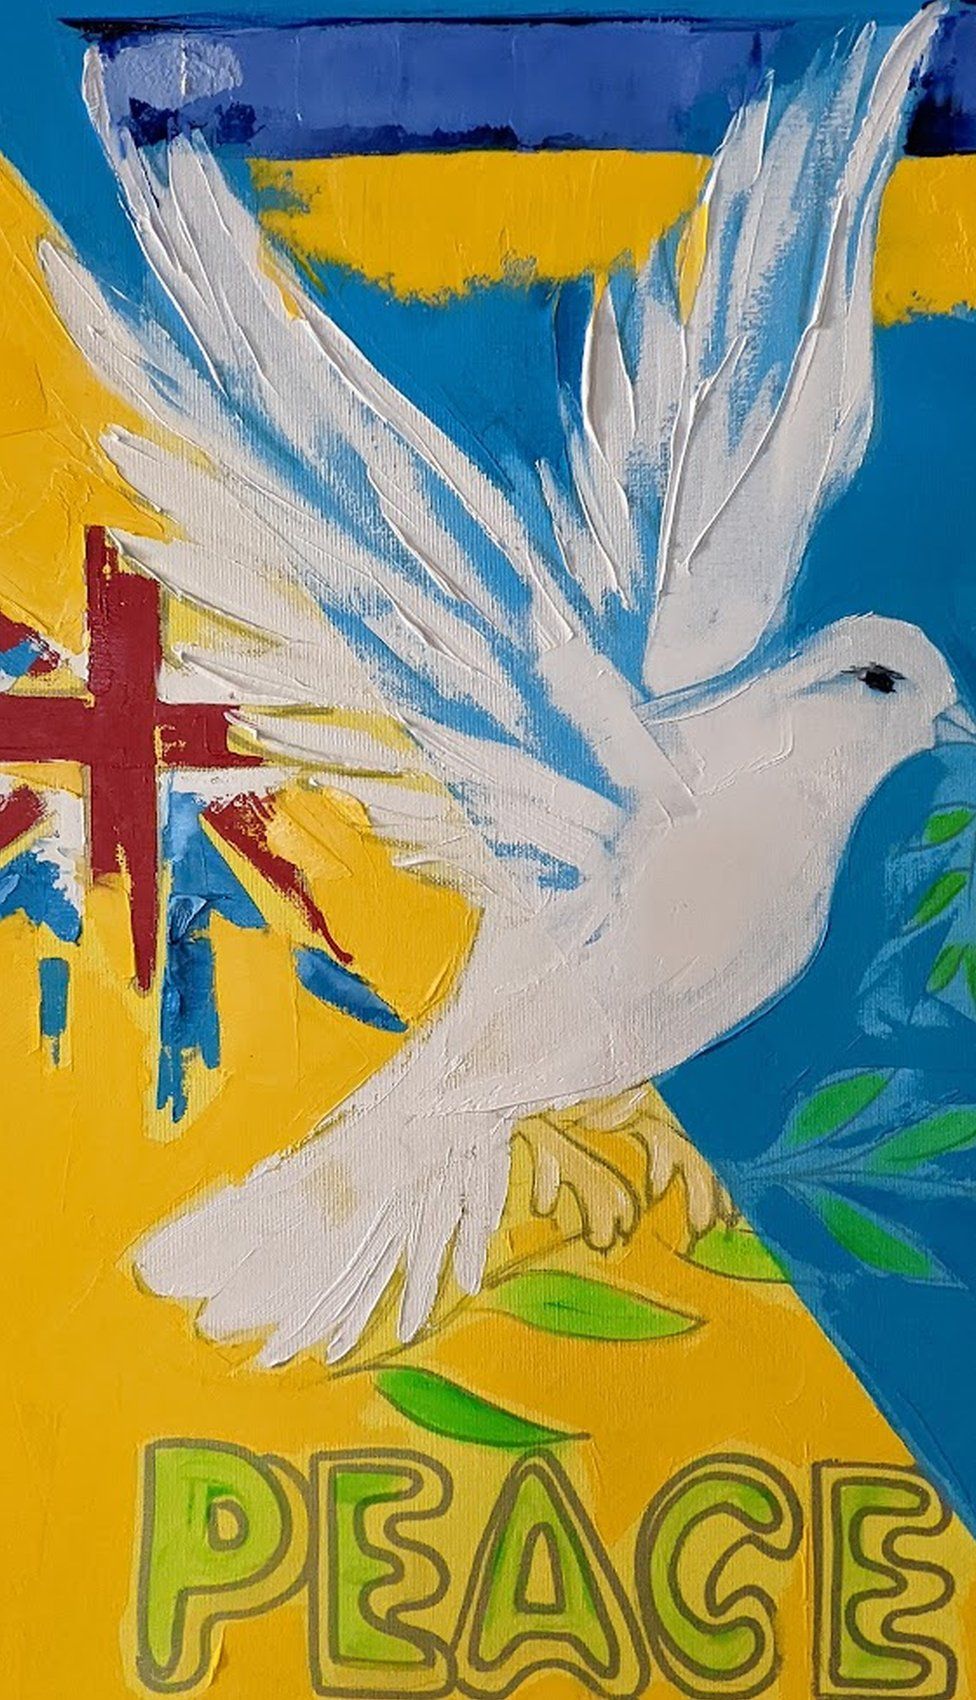 A painting of a bird with peace written on it